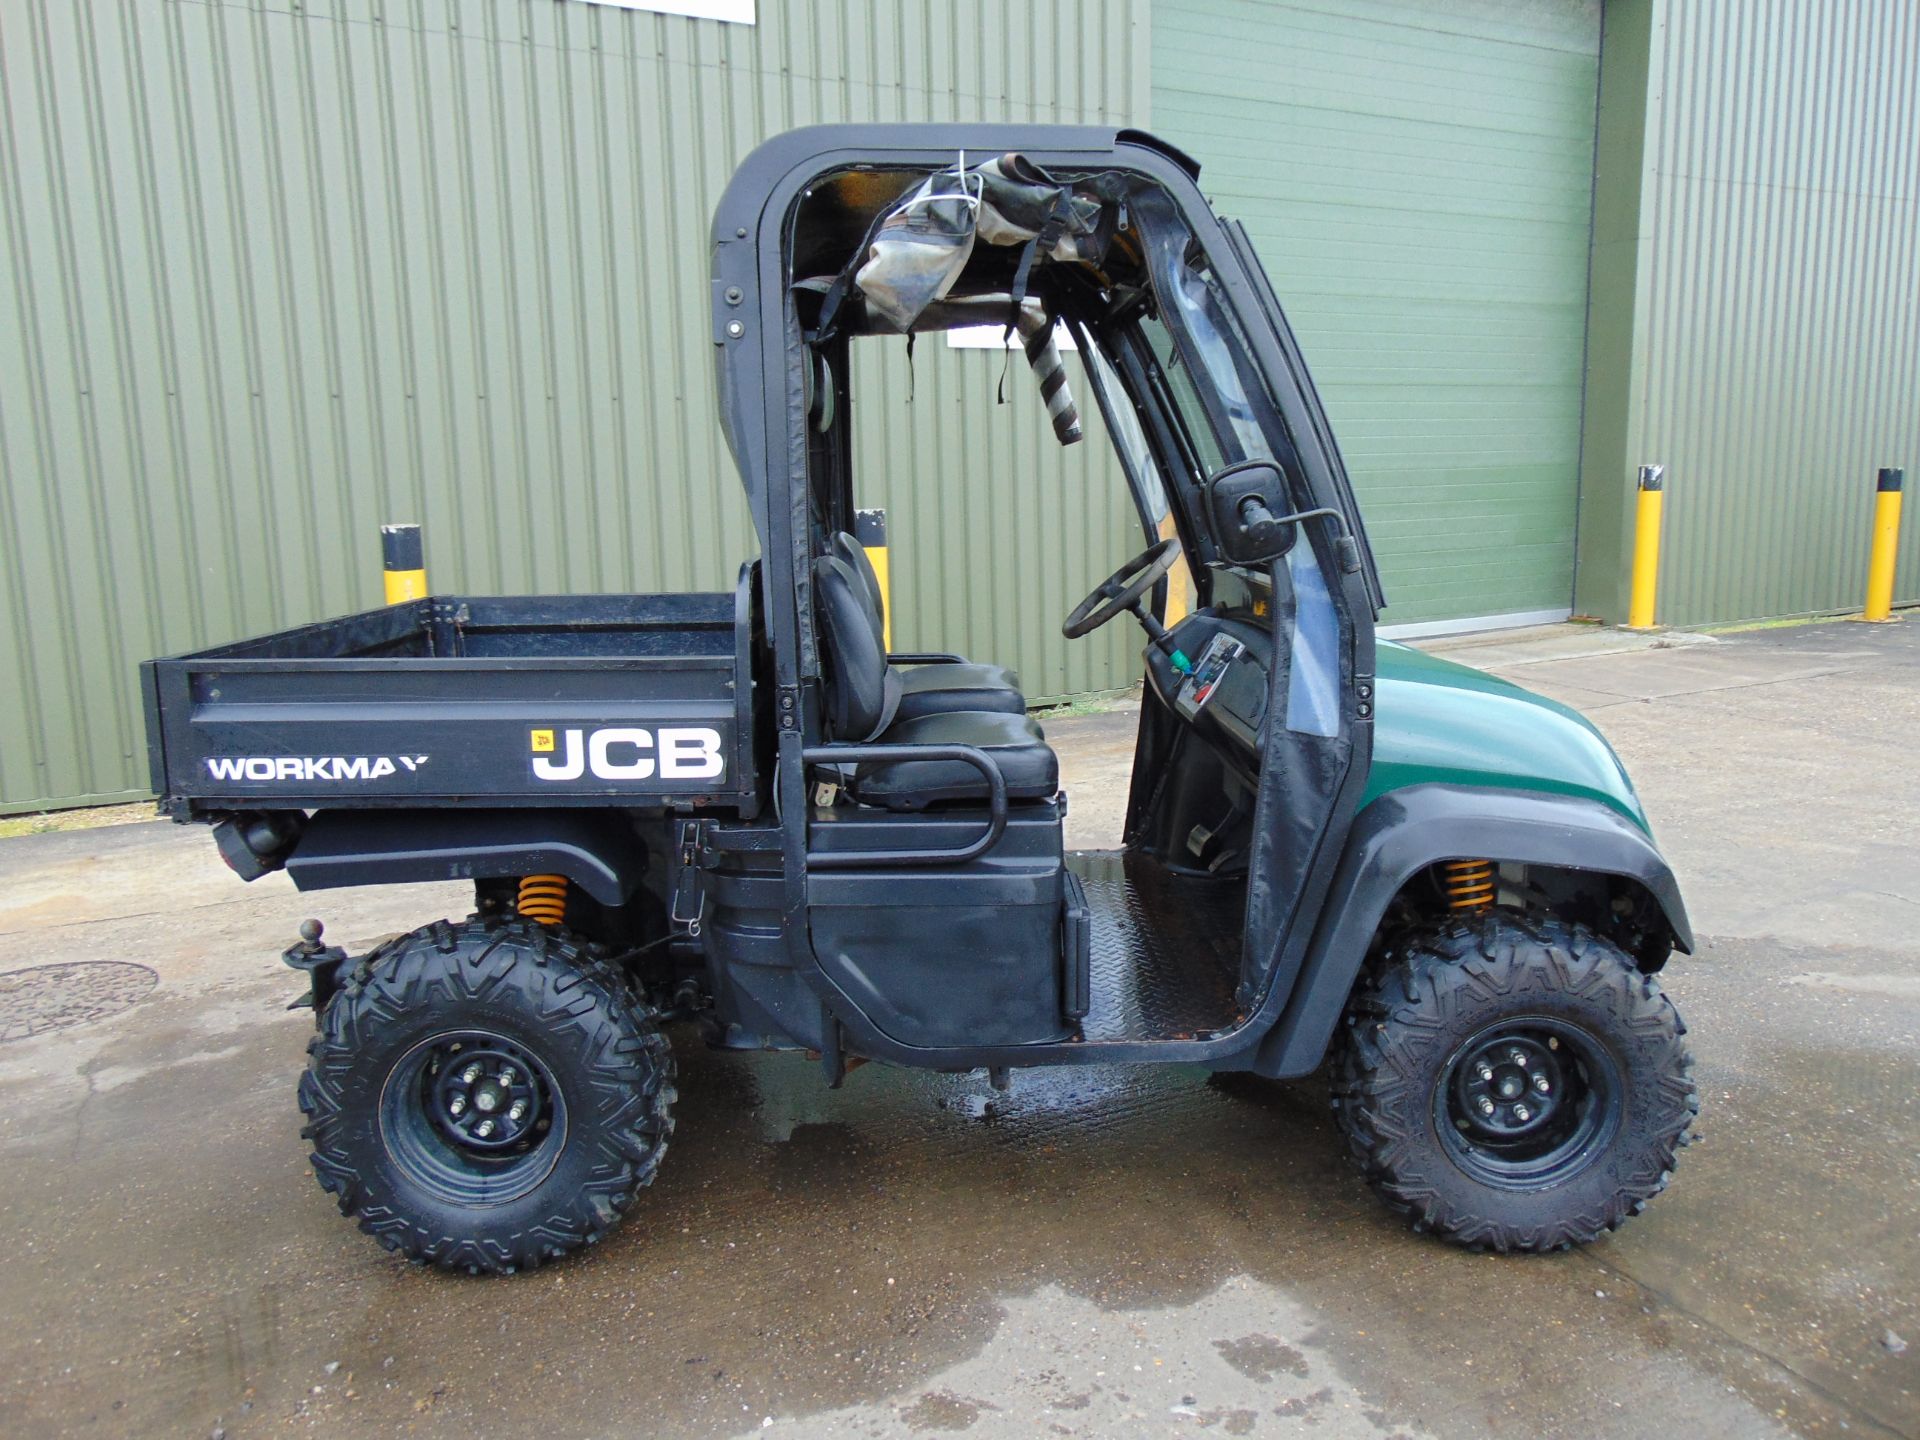 2014 JCB Workmax 4WD Diesel Utility Vehicle shows Only 805 Hours! - Image 15 of 26